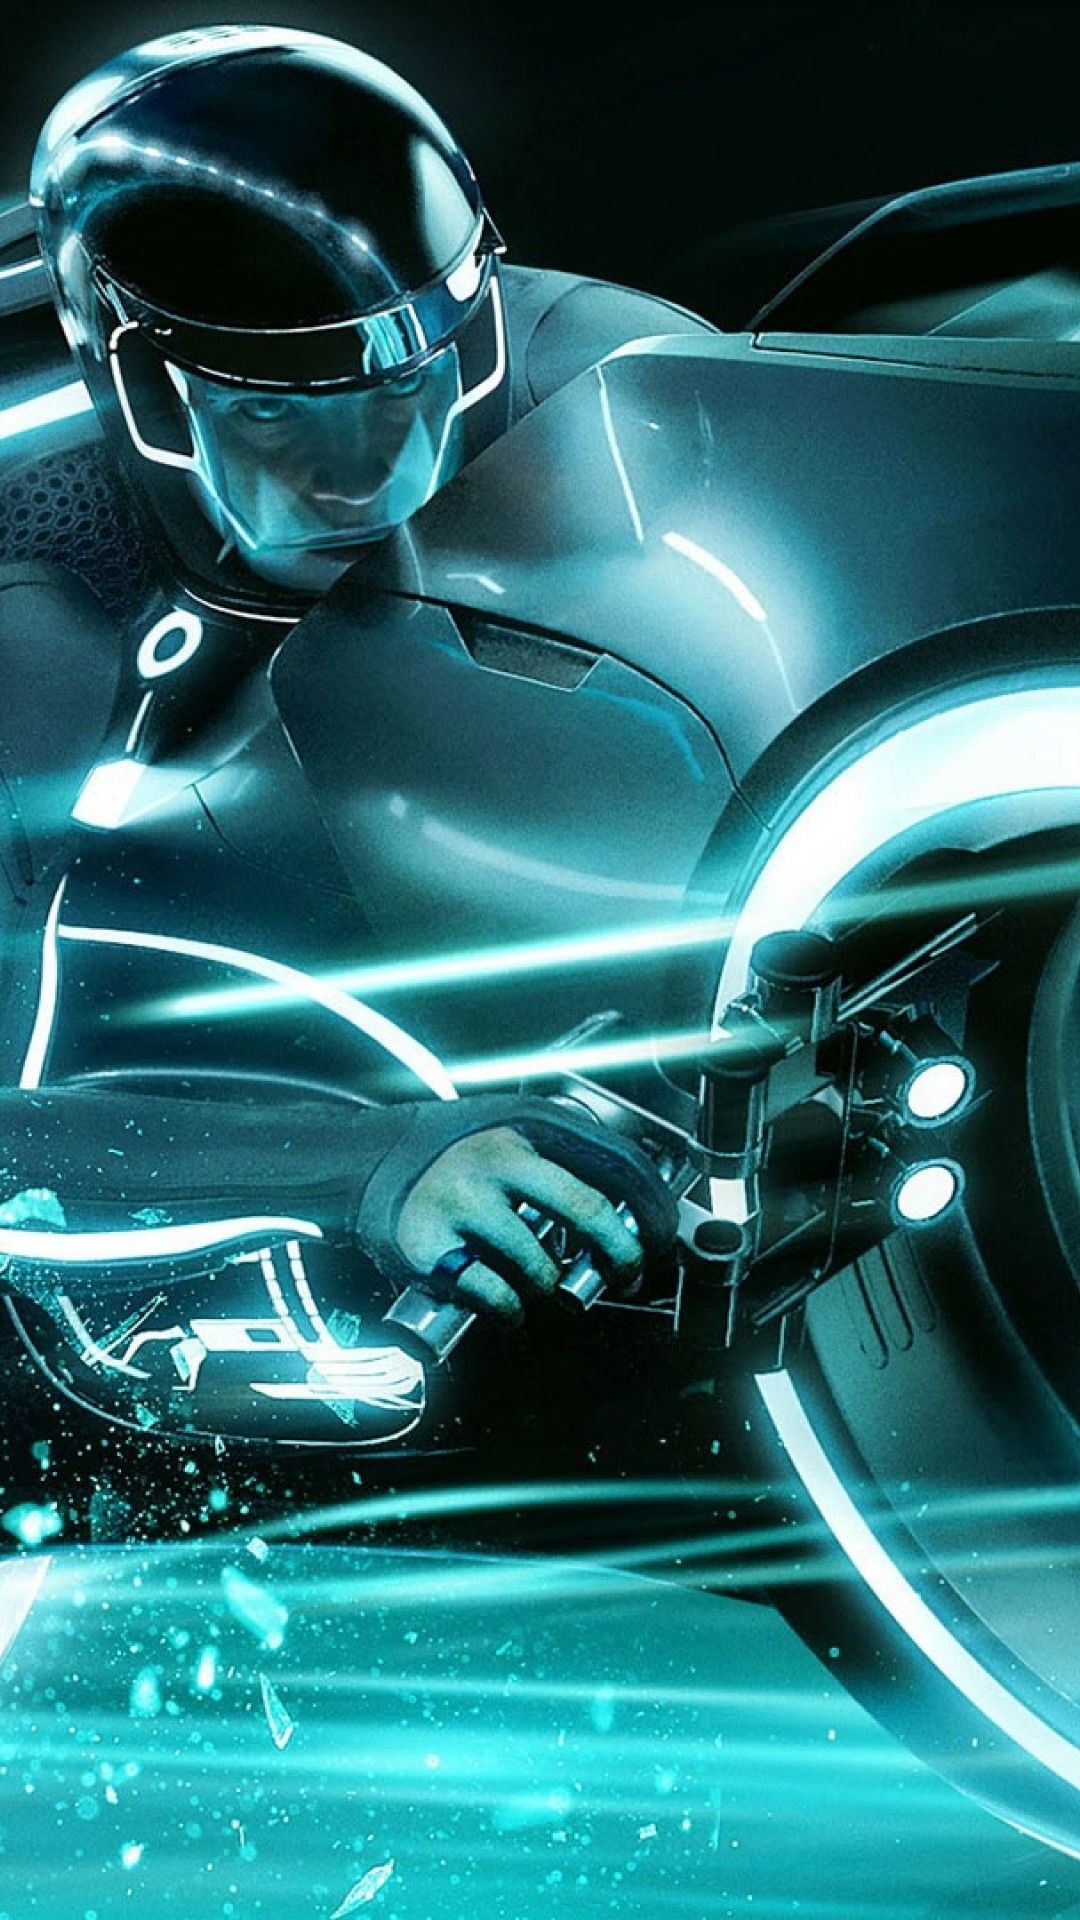 Tron Legacy HD Wallpaper for Desktop and Mobiles iPhone 6 / 6S Plus